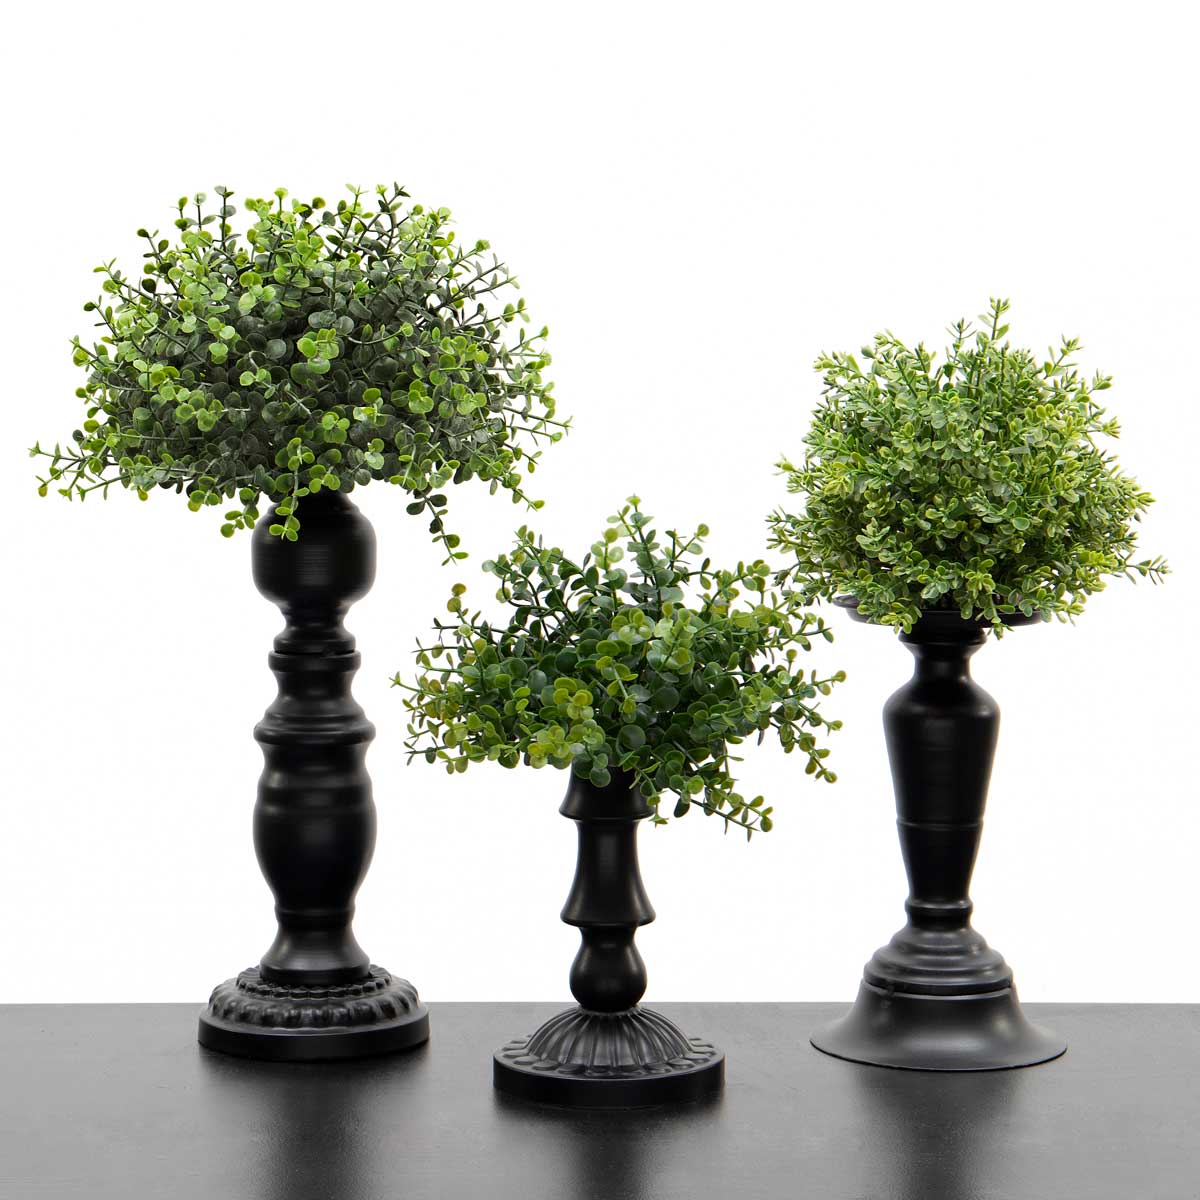 BALL DOME BOXWOOD LIGHT GREEN 6IN X 8IN